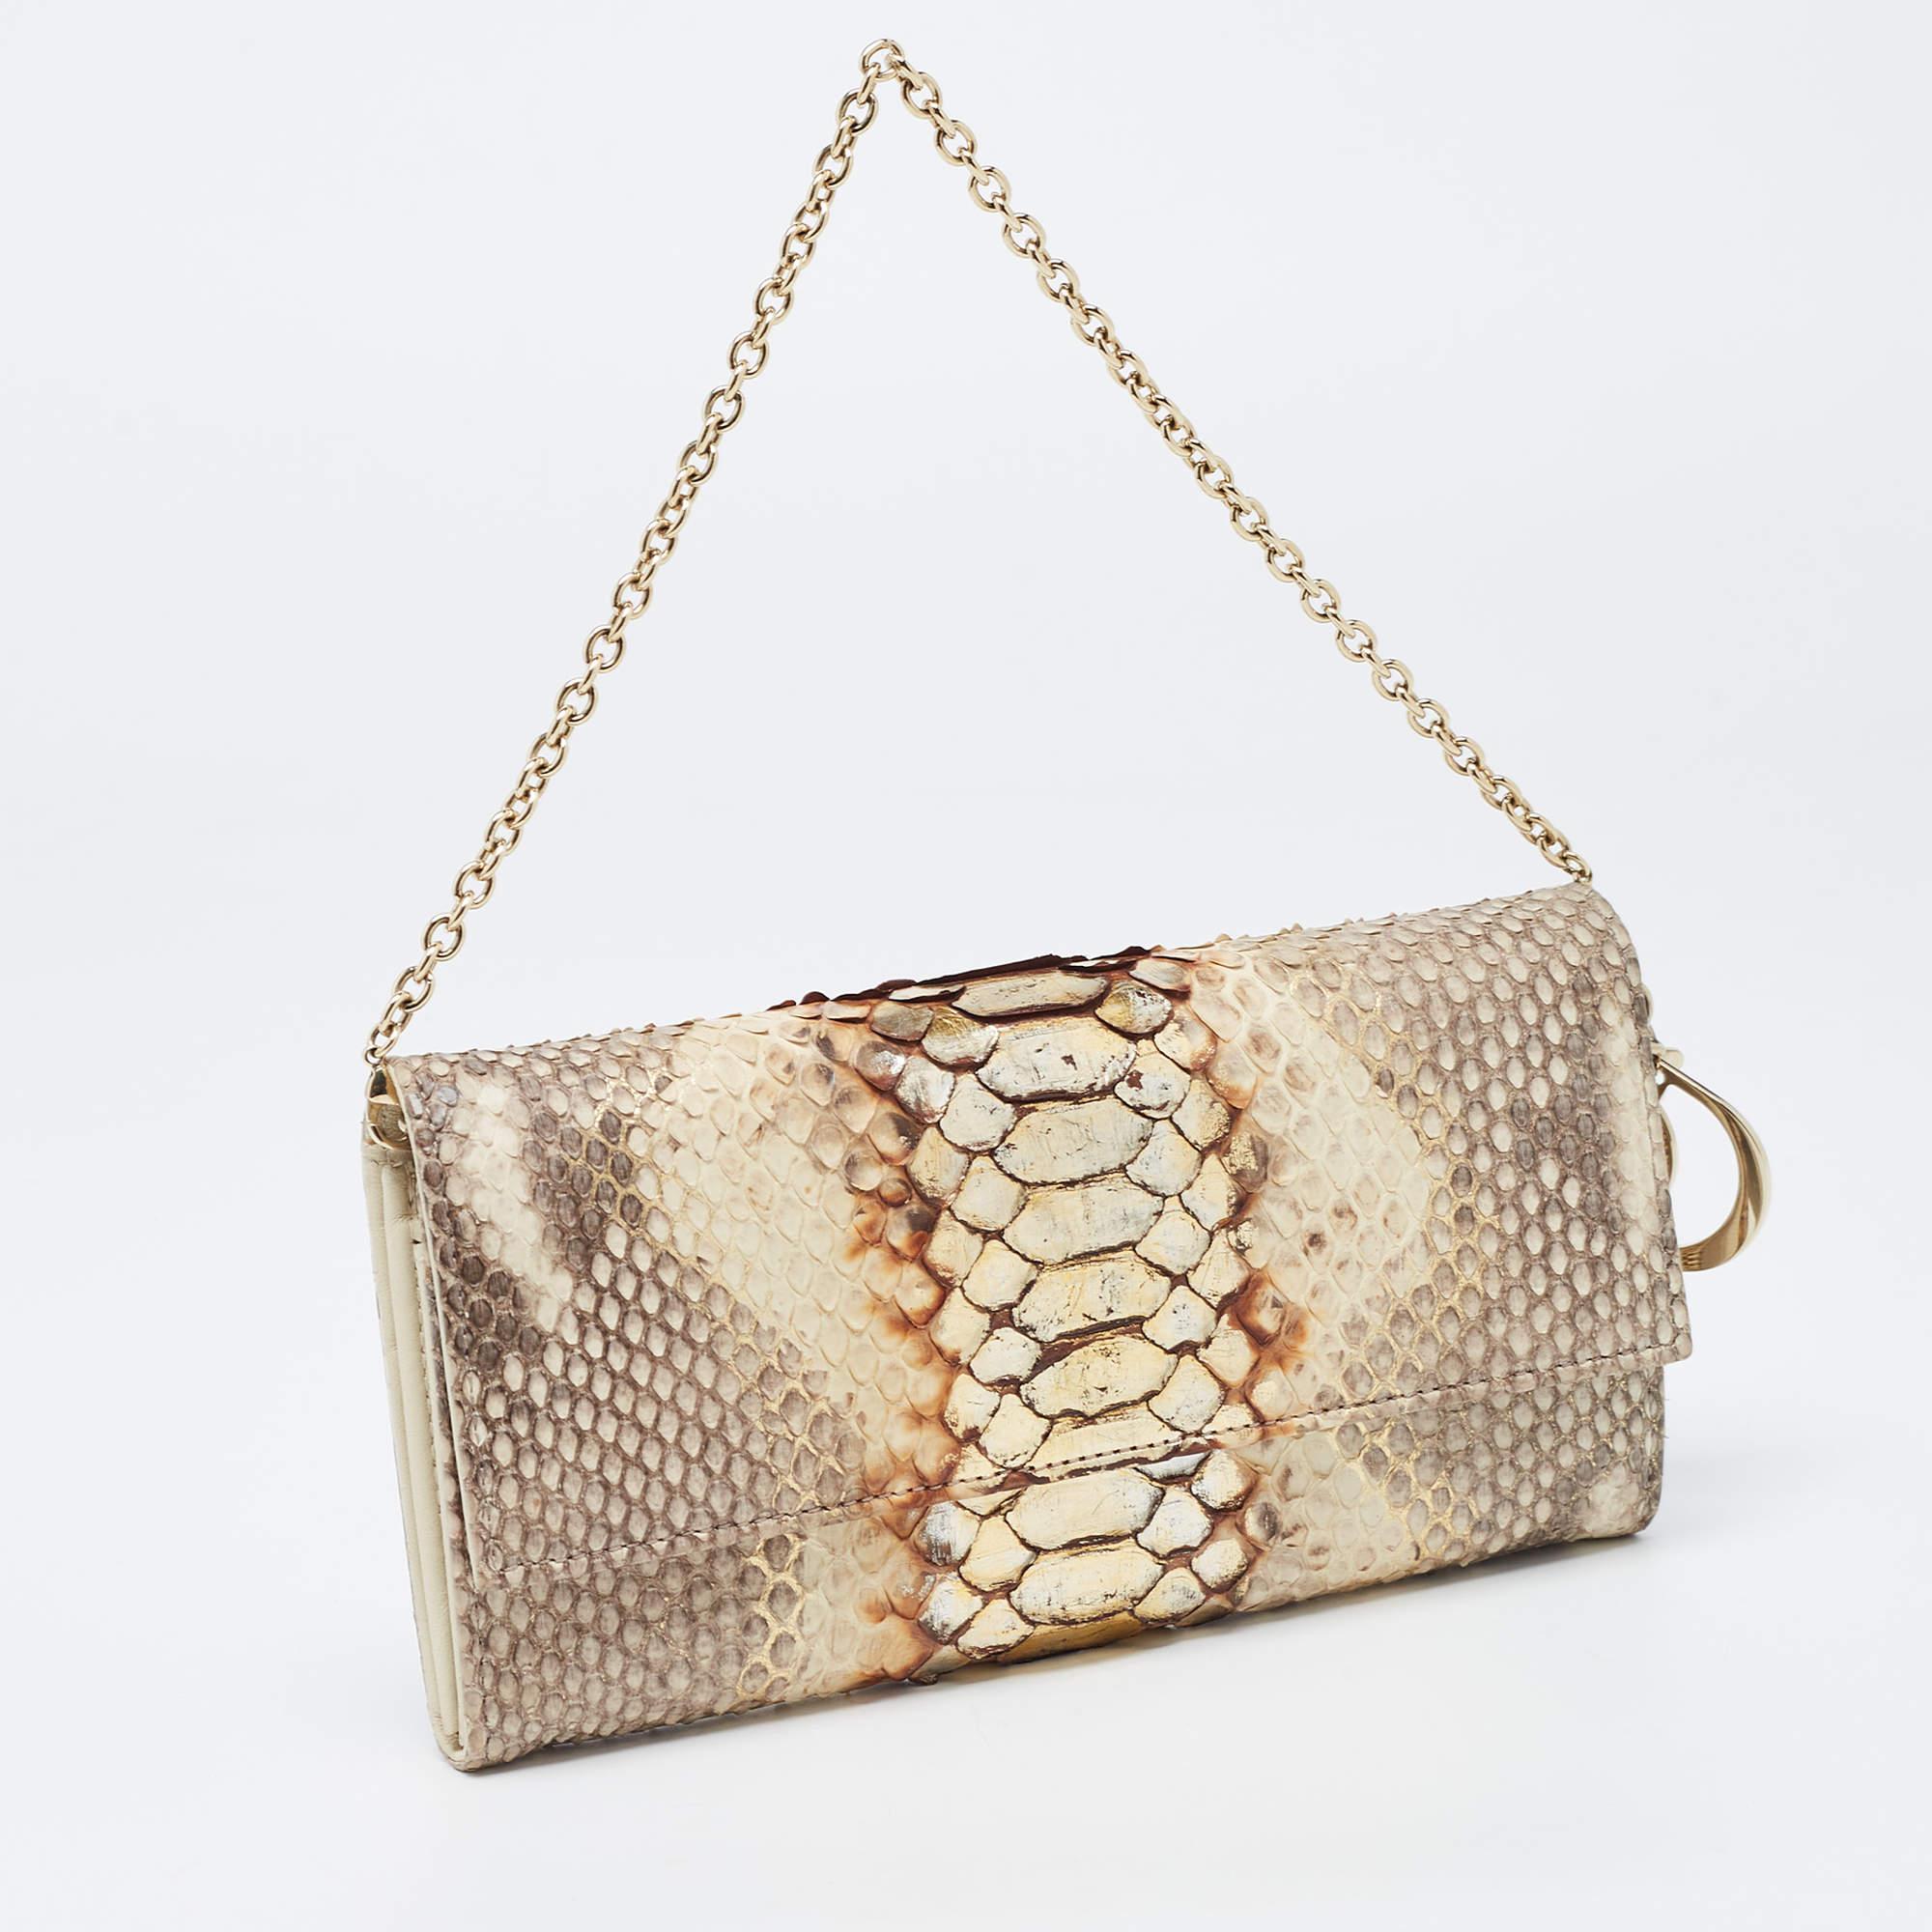 This Lady Dior WOC is a coveted piece that every fashionista craves to possess. This beige WOC has been crafted from python and leather and it carries a lovely exterior. It is equipped with a leather and fabric interior featuring multiple card slots